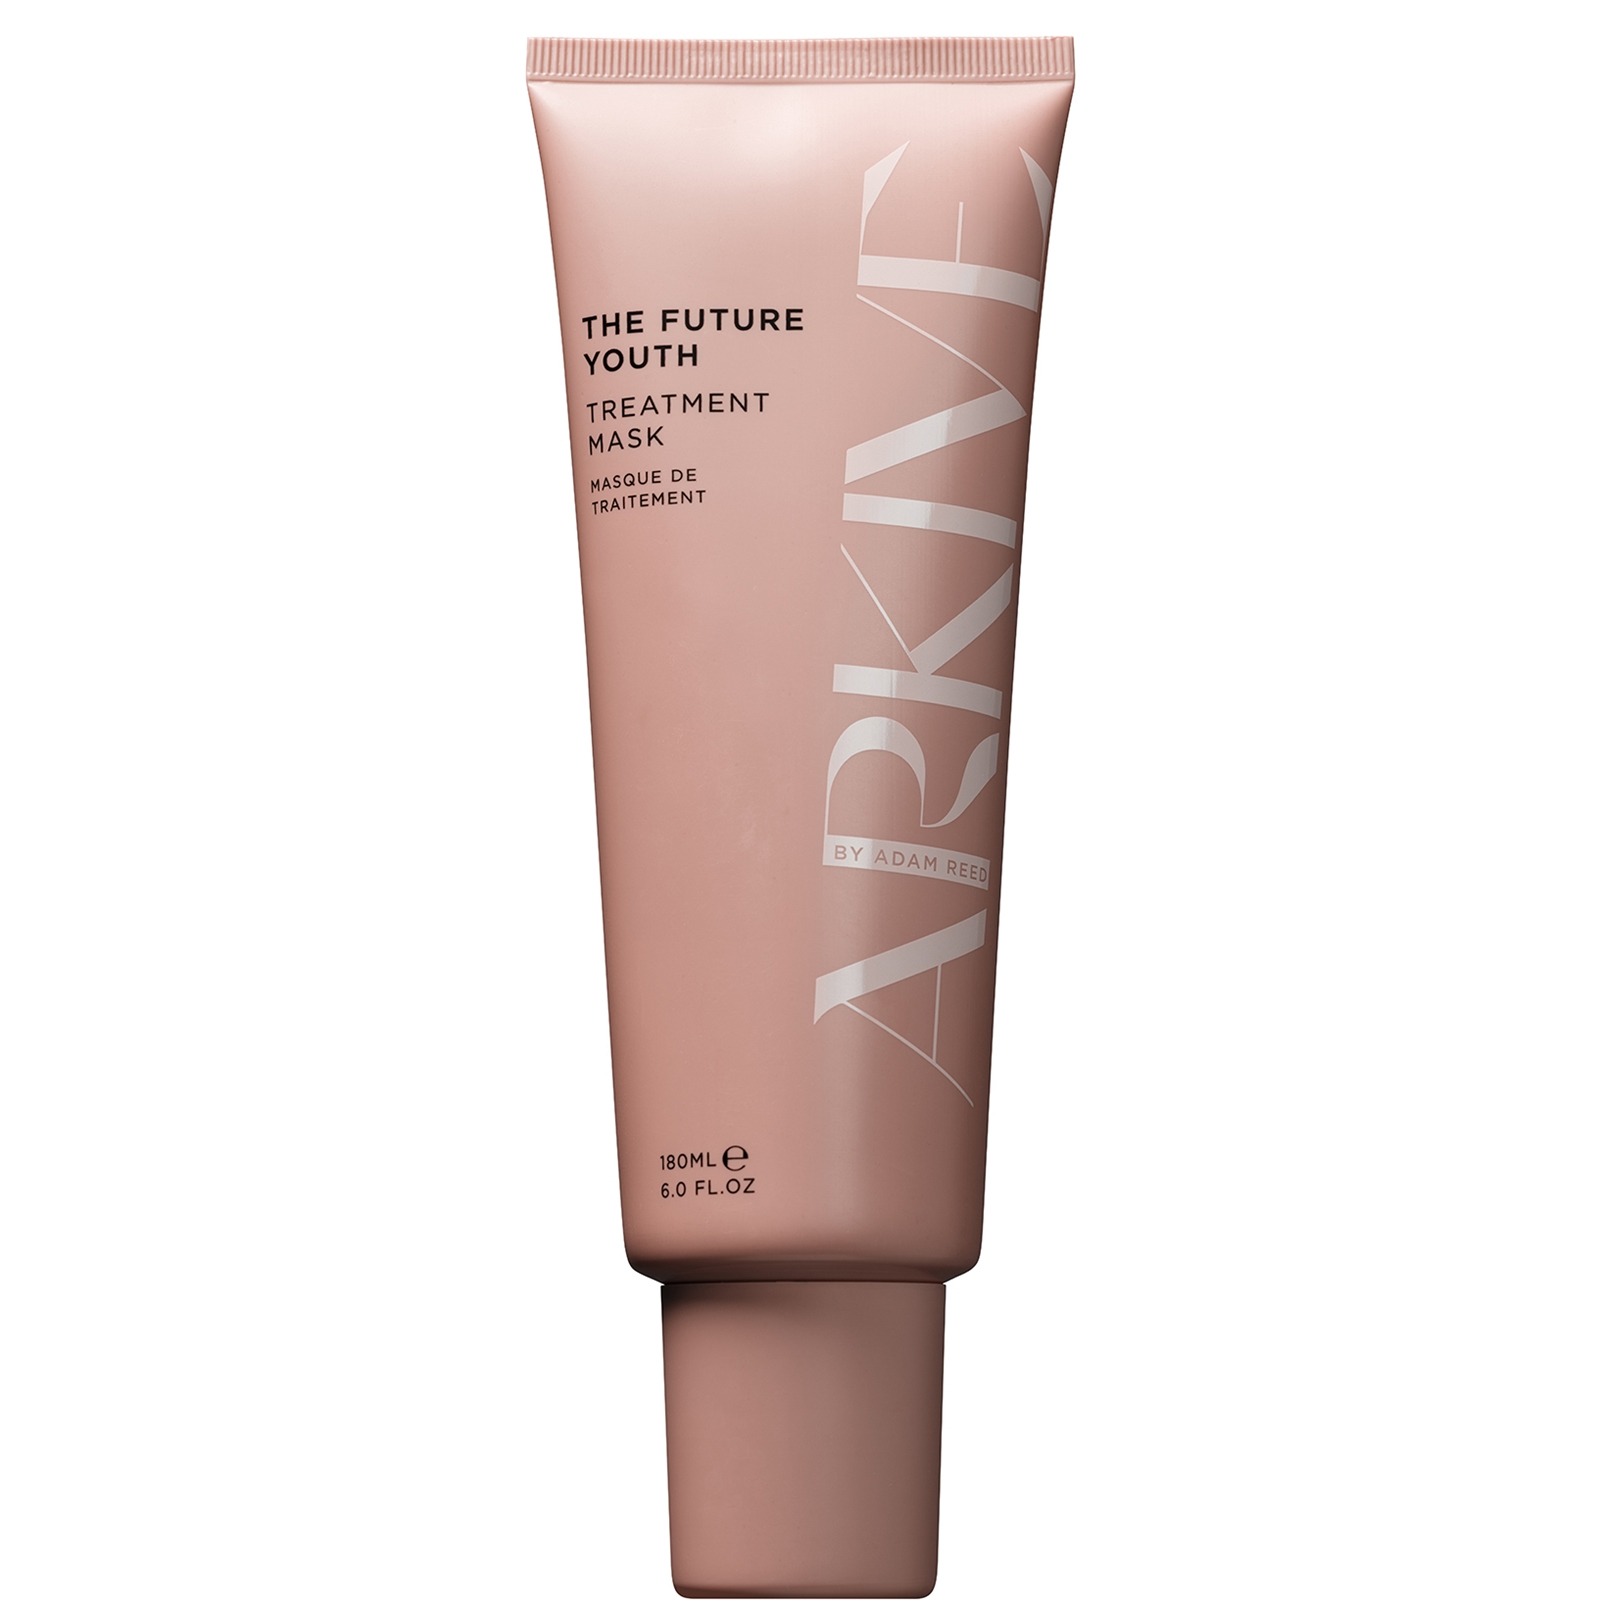 Image of ARKIVE Headcare The Future Youth Treatment Mask 180ml